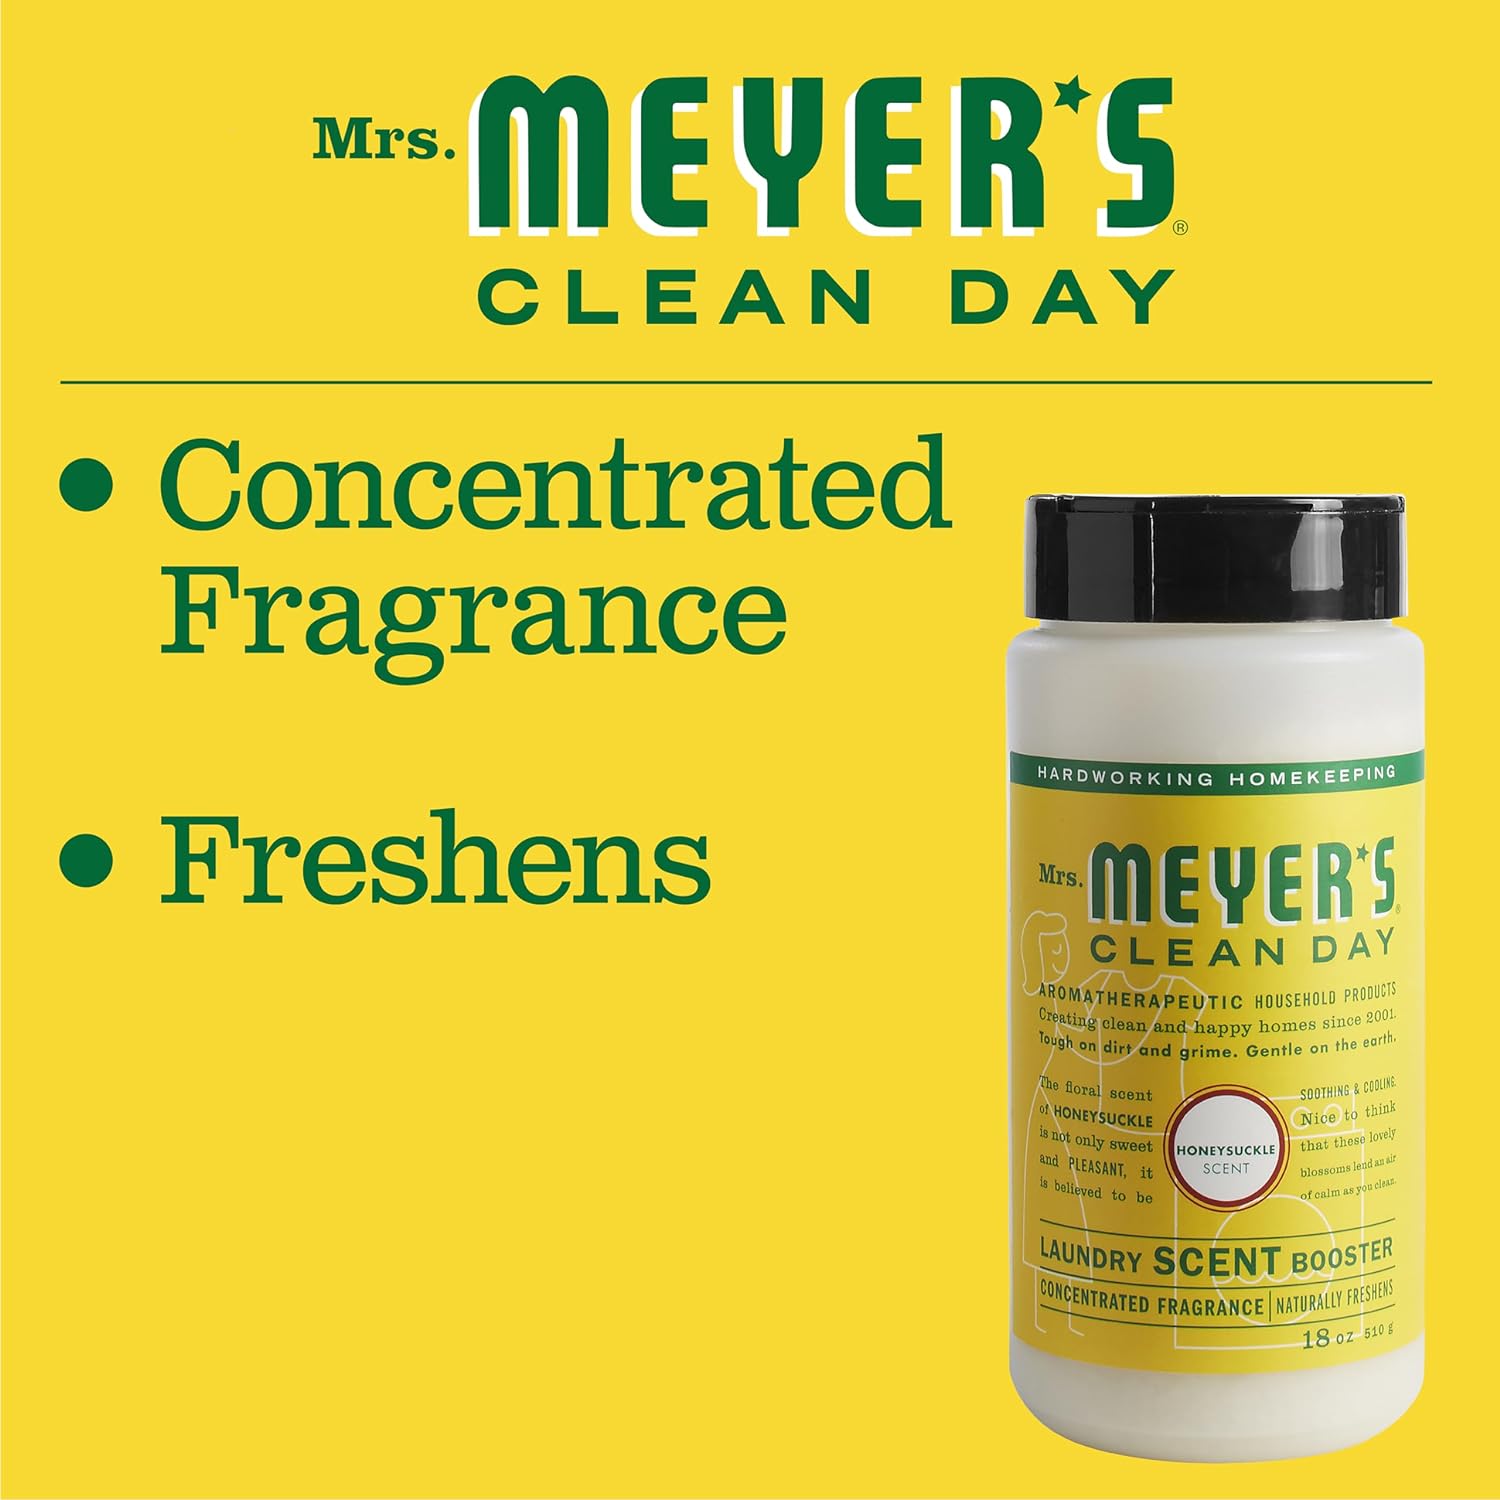 MRS. MEYER'S CLEAN DAY Laundry Booster, Pair with Liquid Laundry Detergent Or Detergent Pods, Honeysuckle, 18 oz : Health & Household